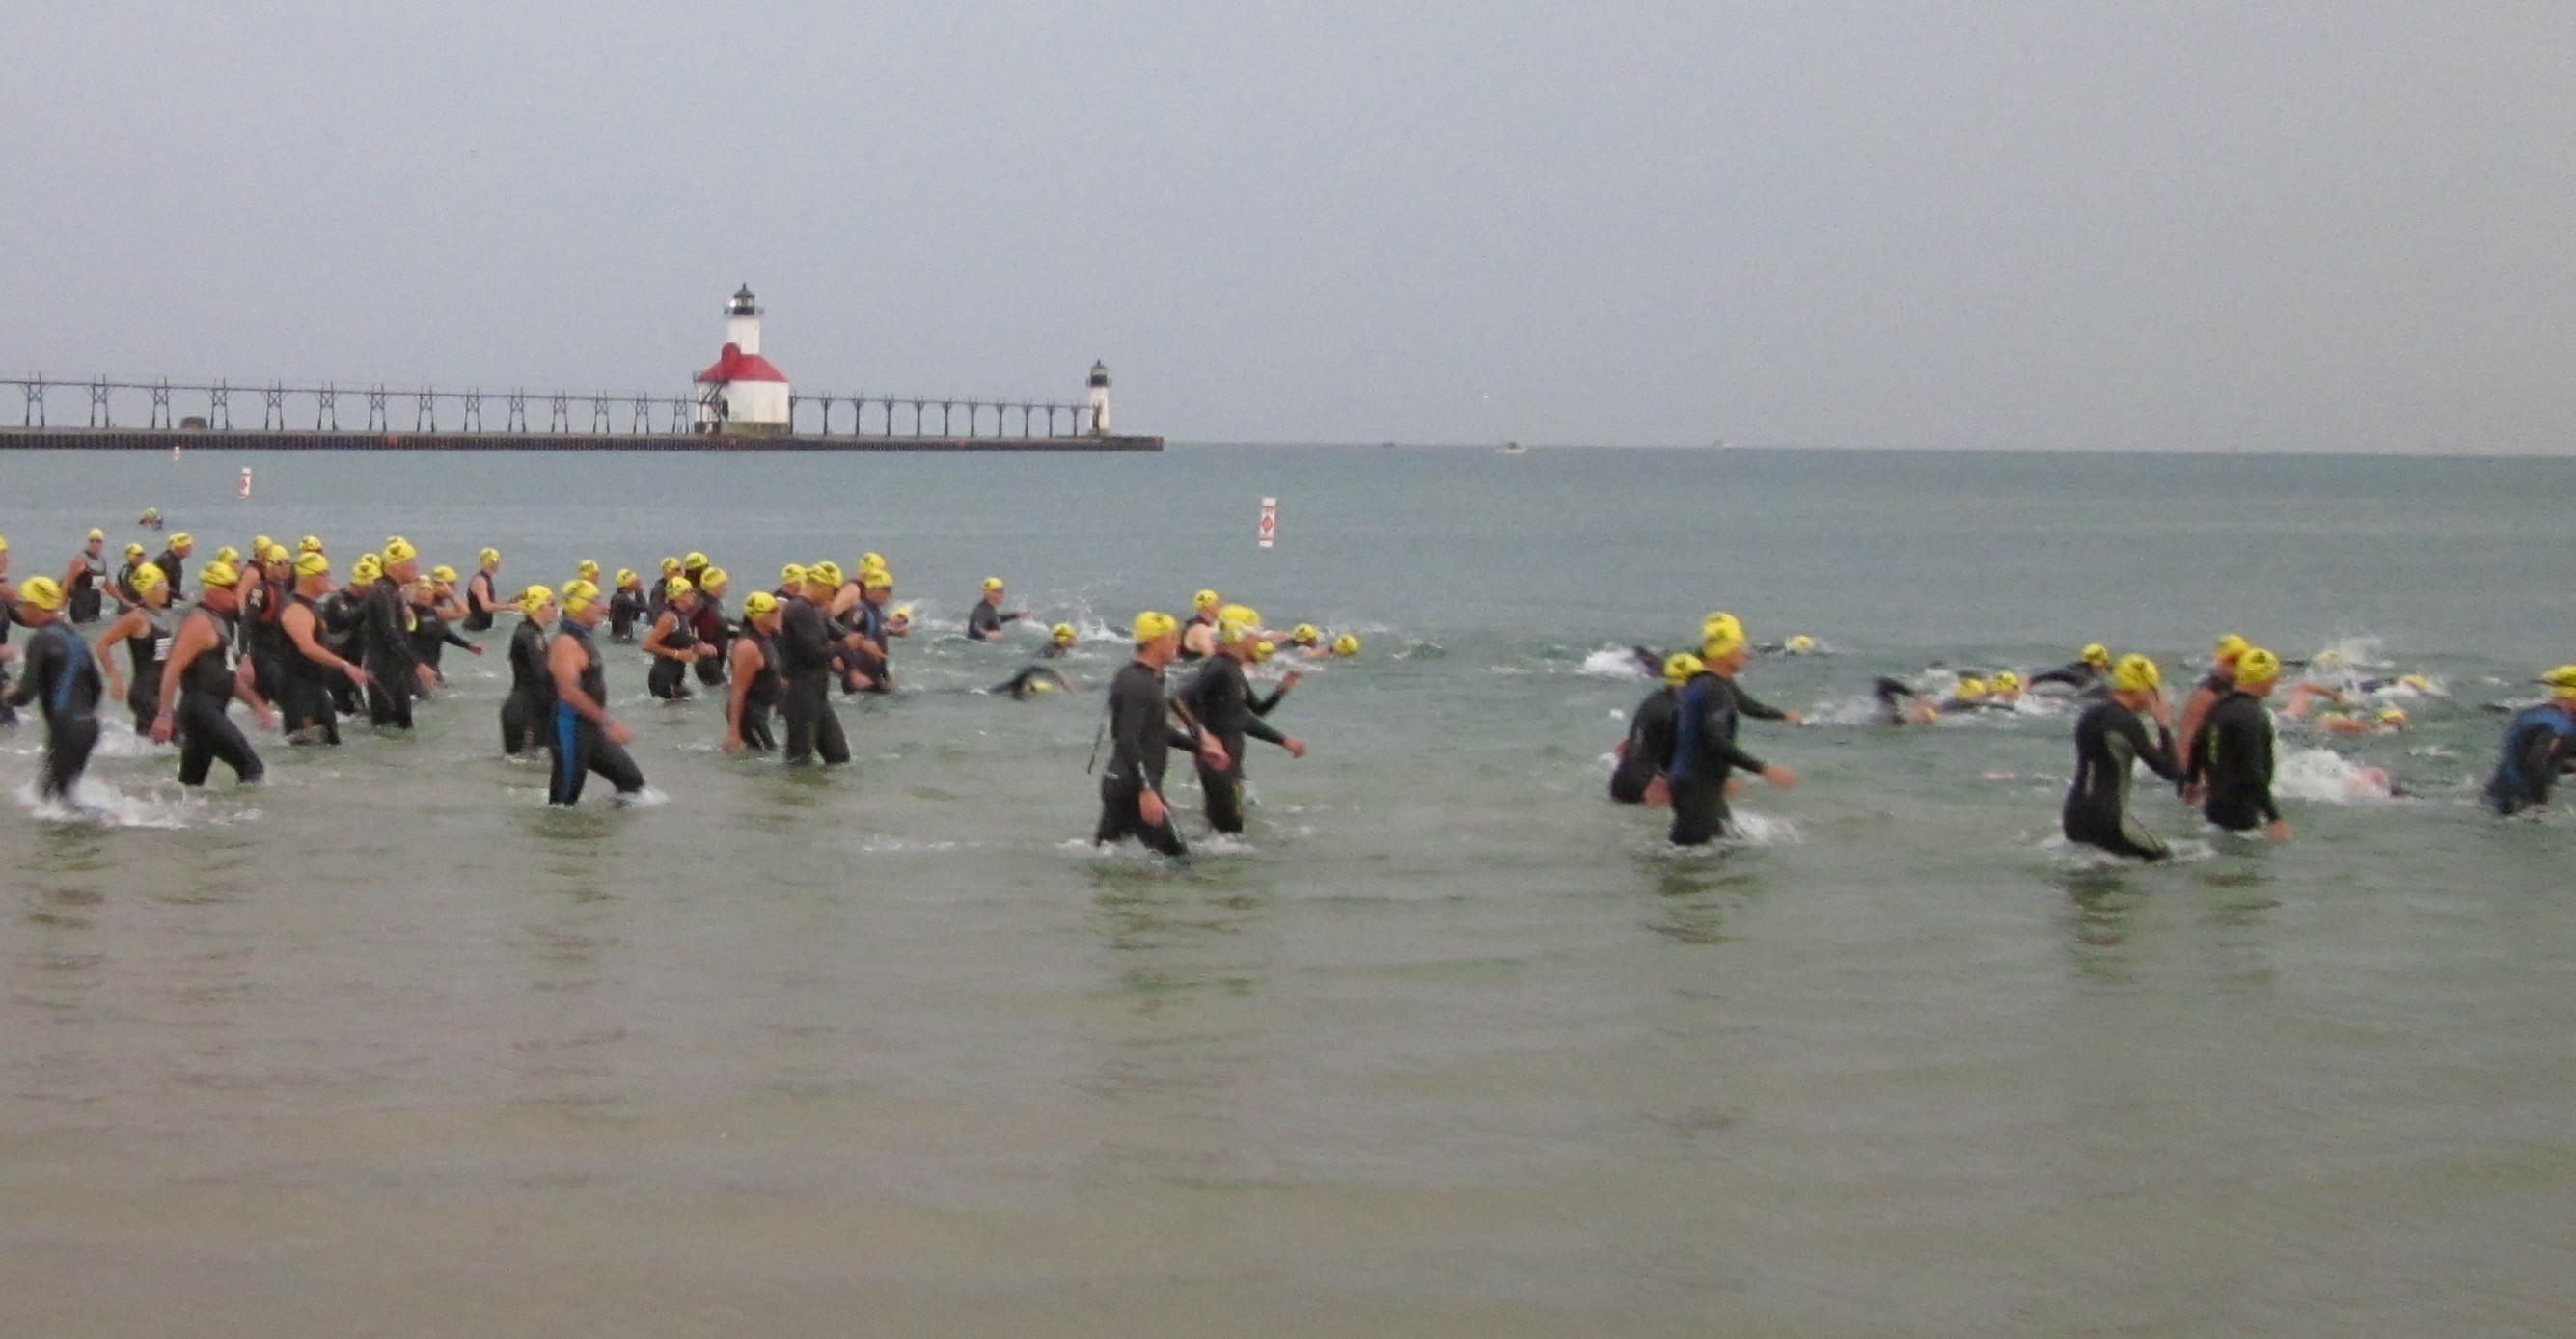 Preparing for Open Water Swimming